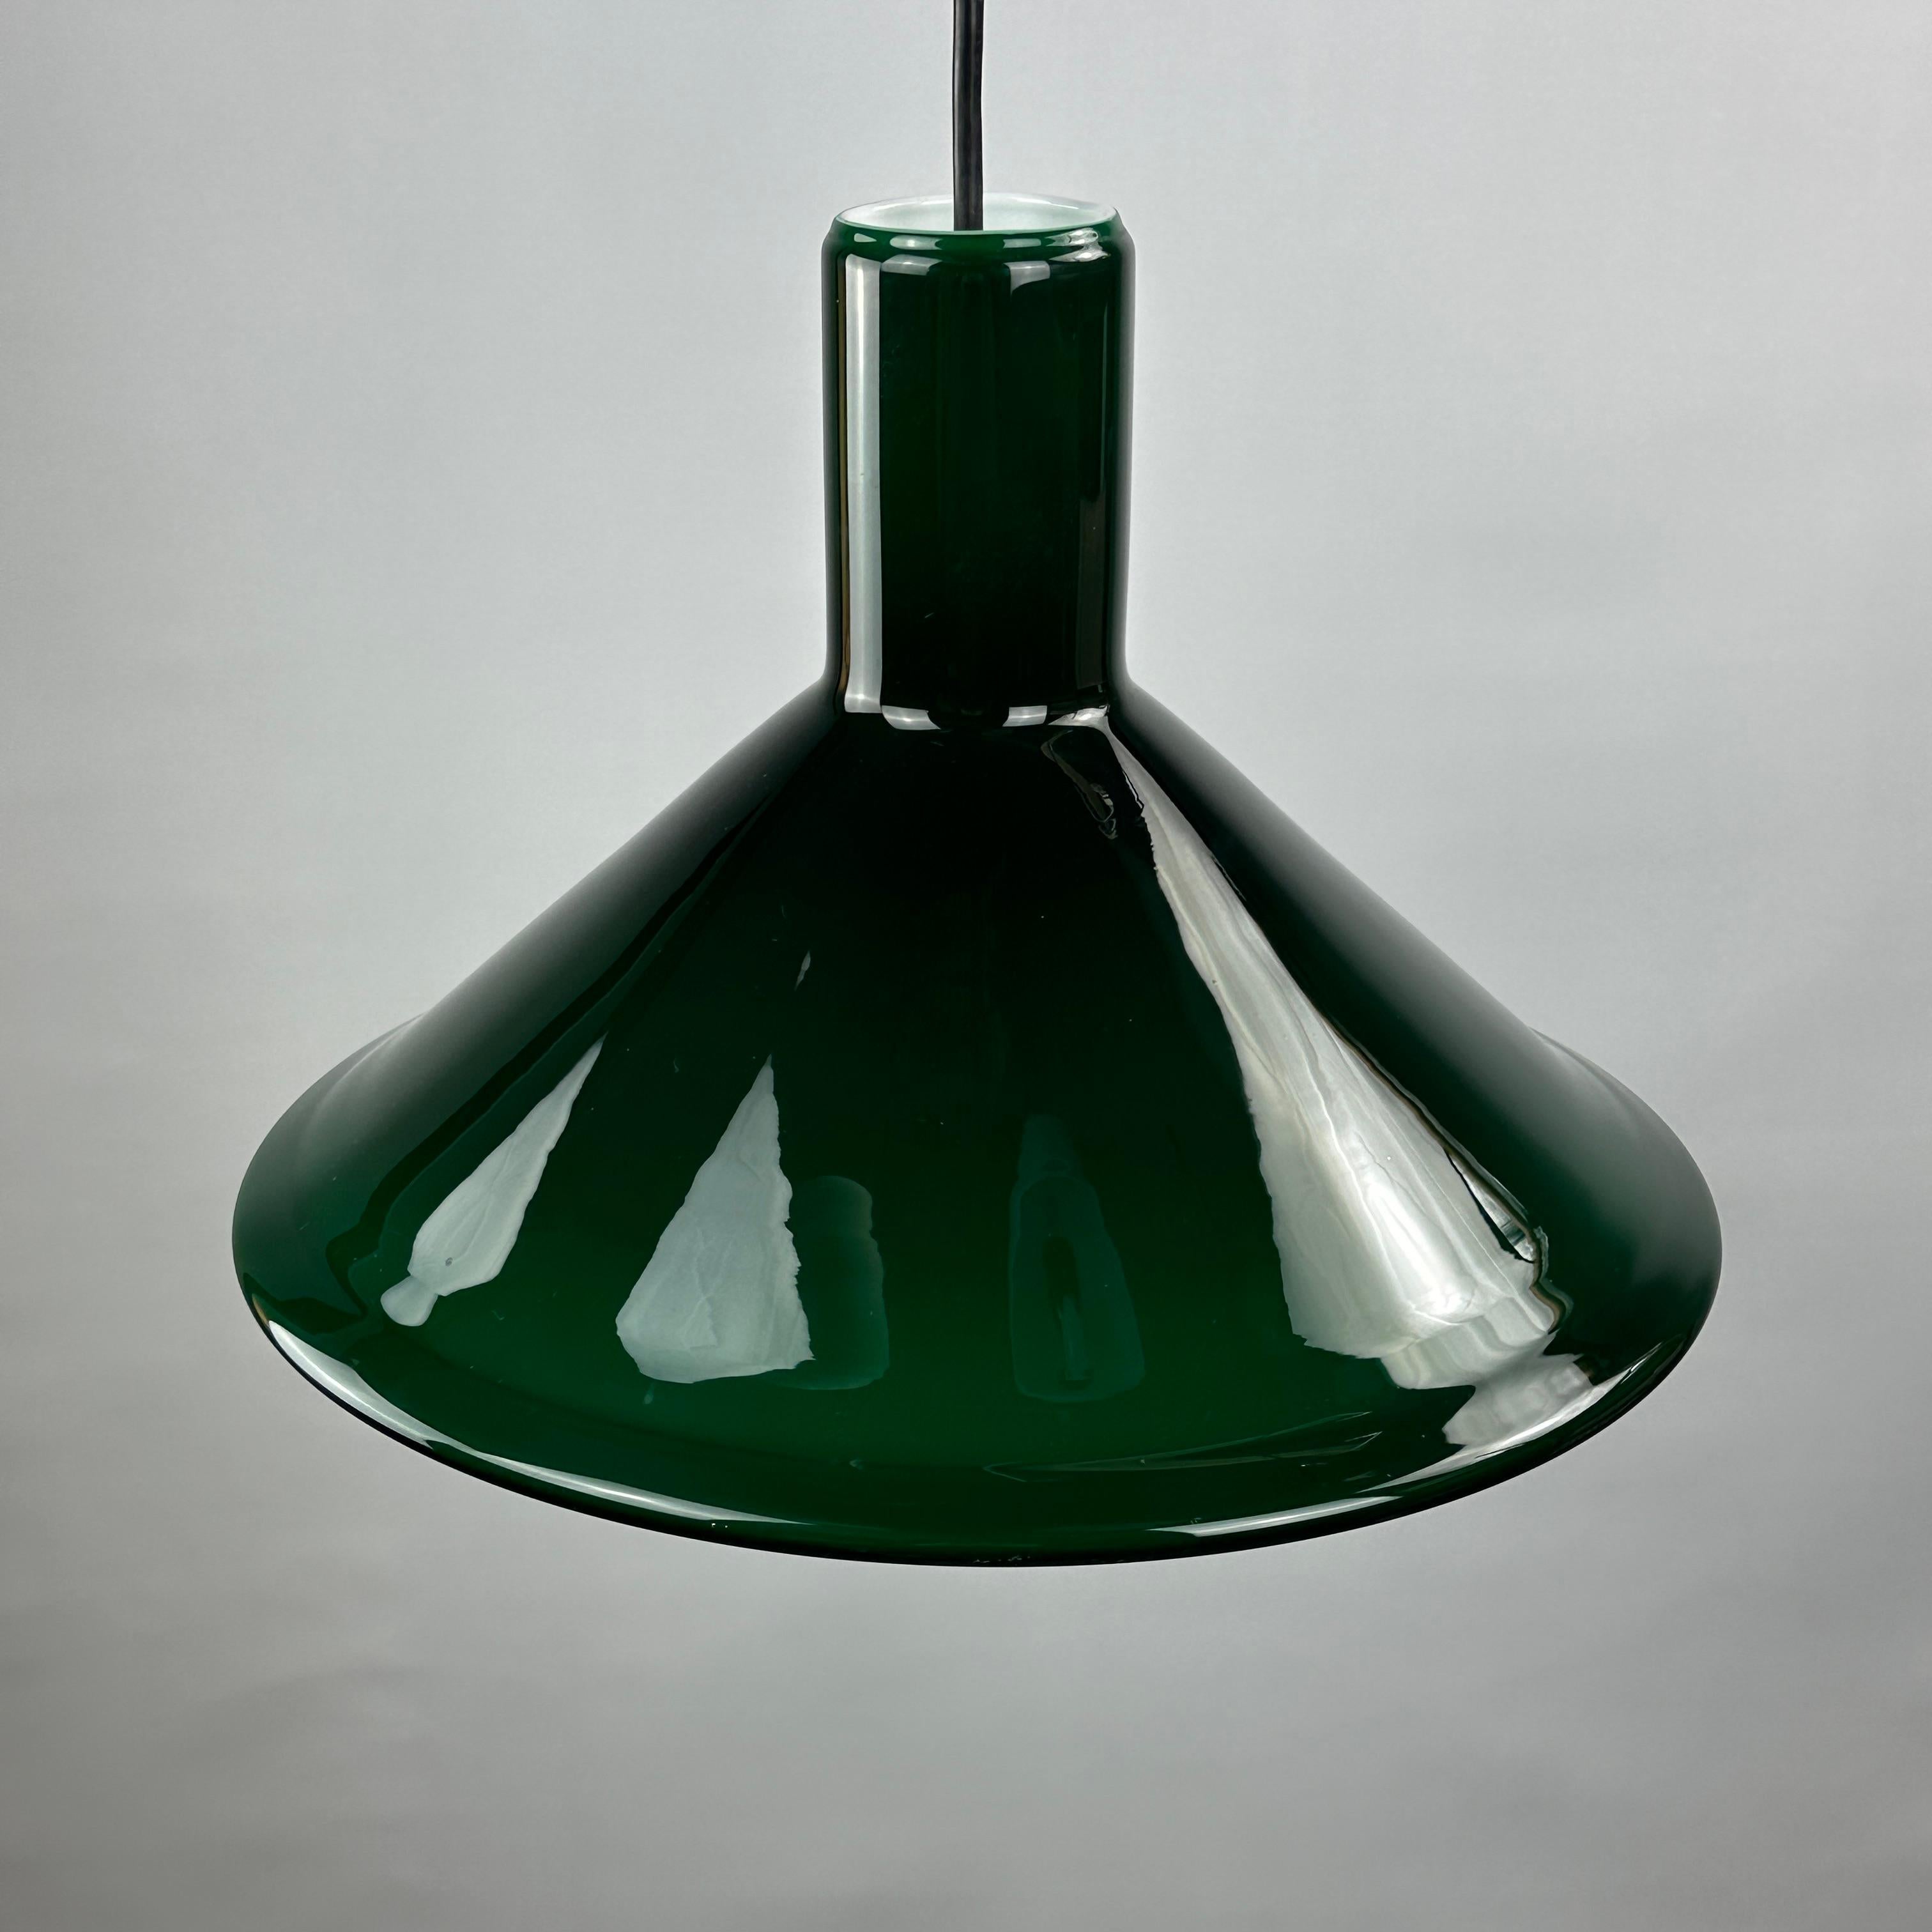 Green Danish glass pendant light Model P & T by Michael Bang for Holmegaard 1972 For Sale 4